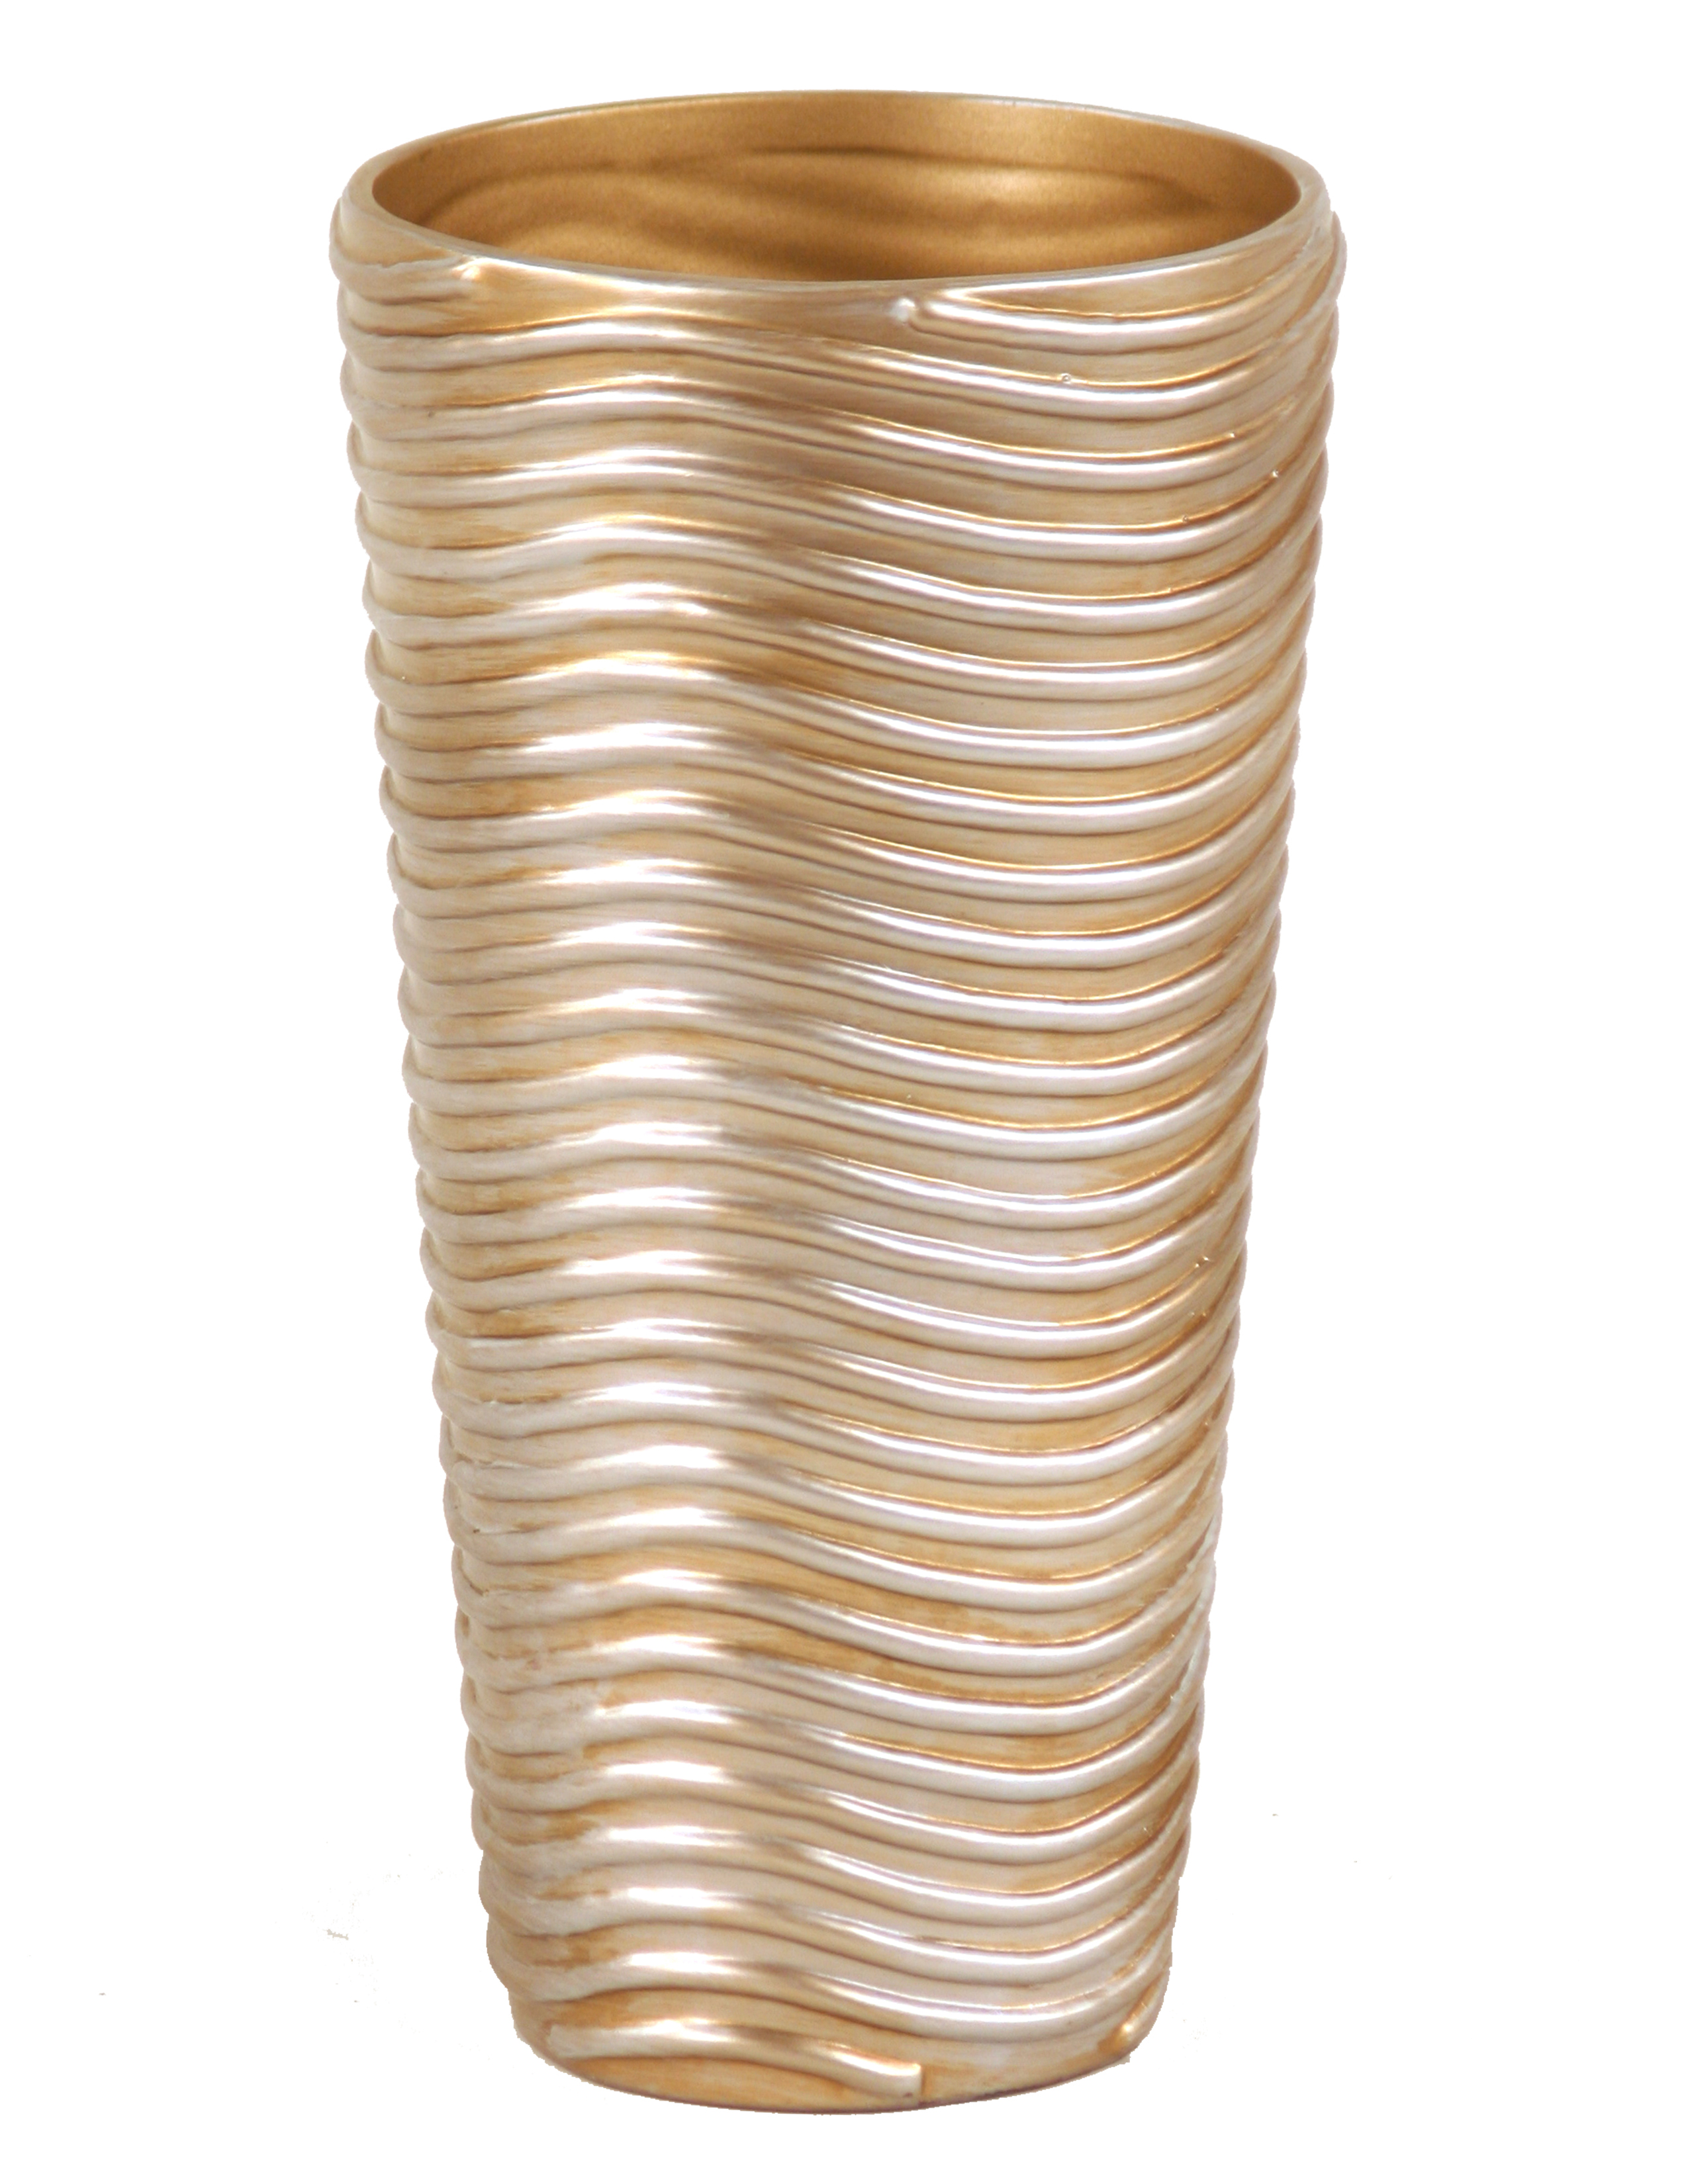 Tall Cylinder Vase with a Moonstone Finish and Wavy Line Relief